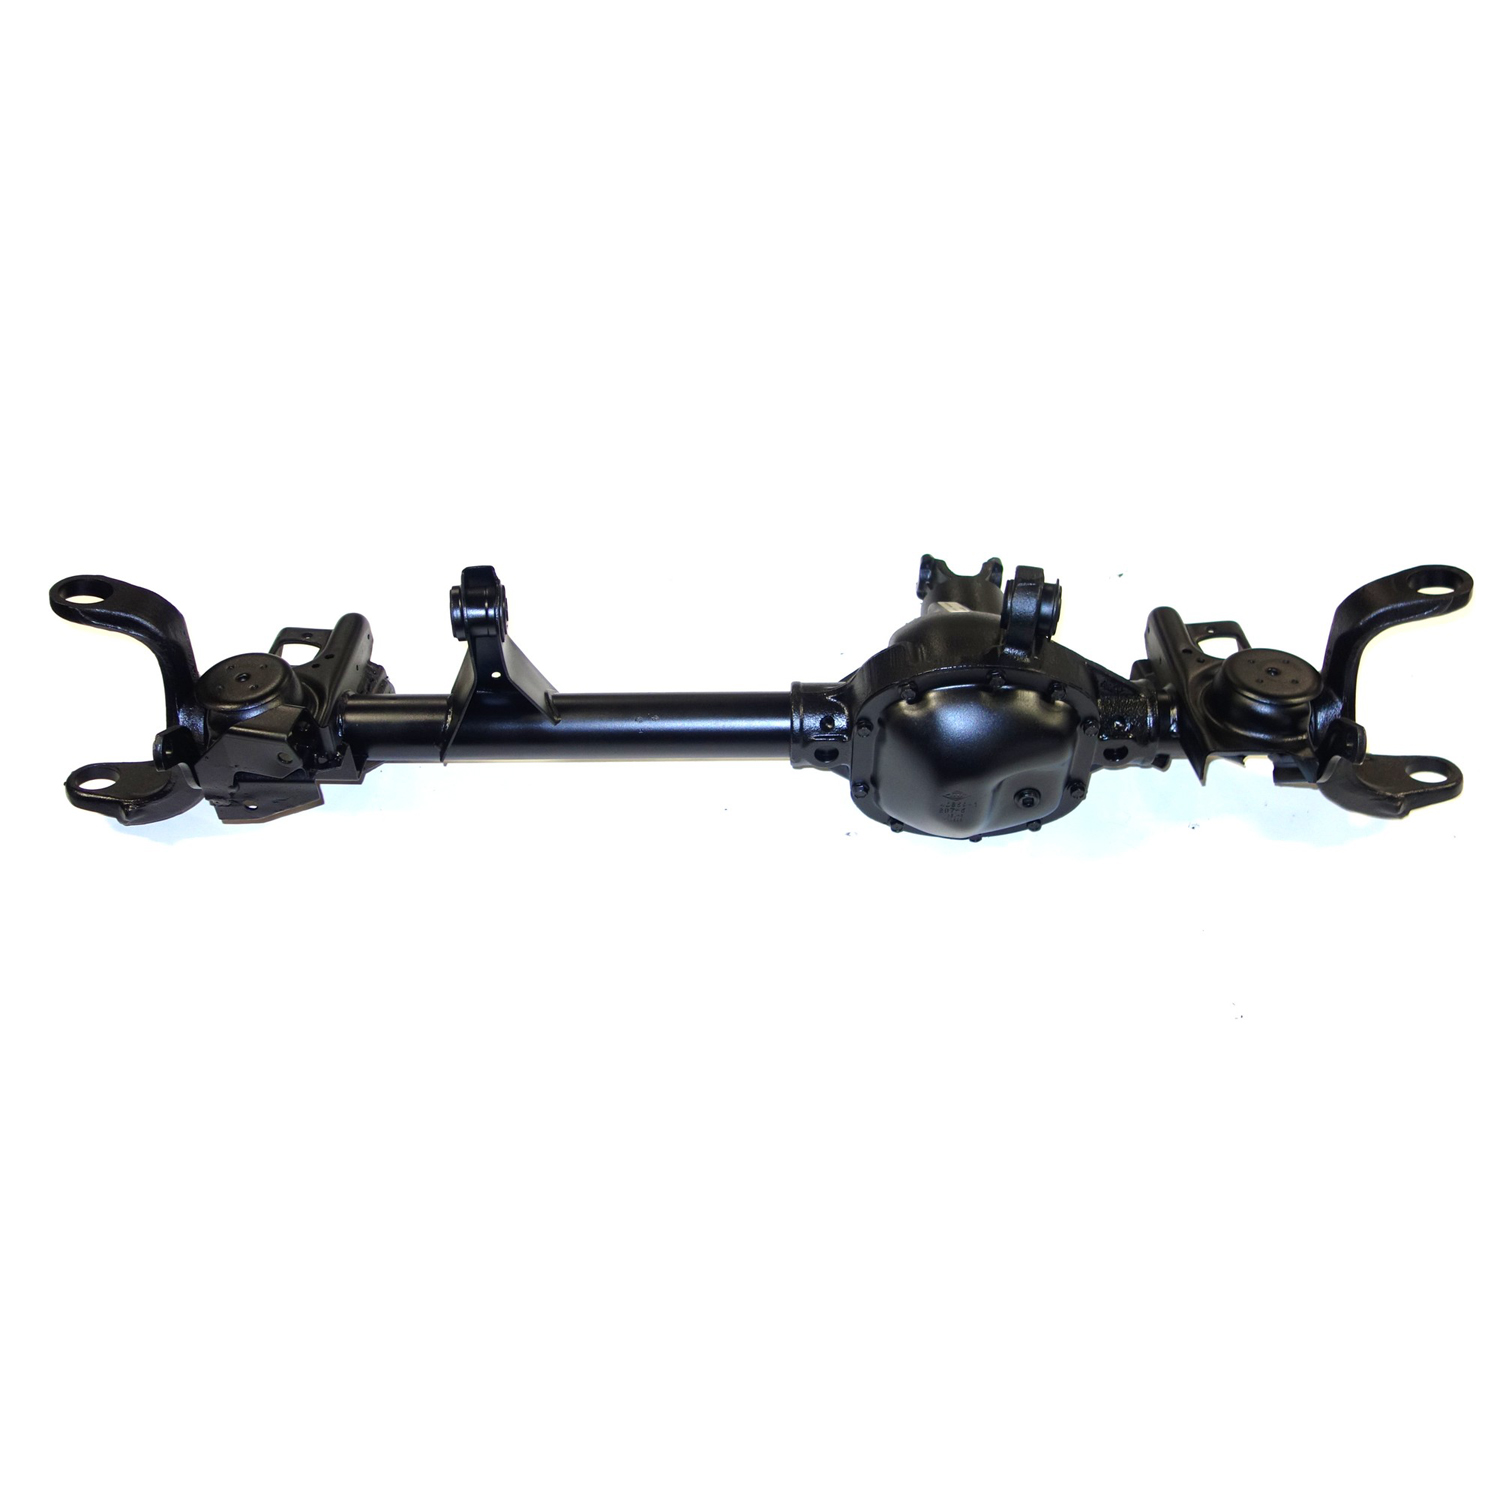 Reman Axle Assembly for Dana 30 94-99 Jeep Cherokee 3.73 Ratio with ABS